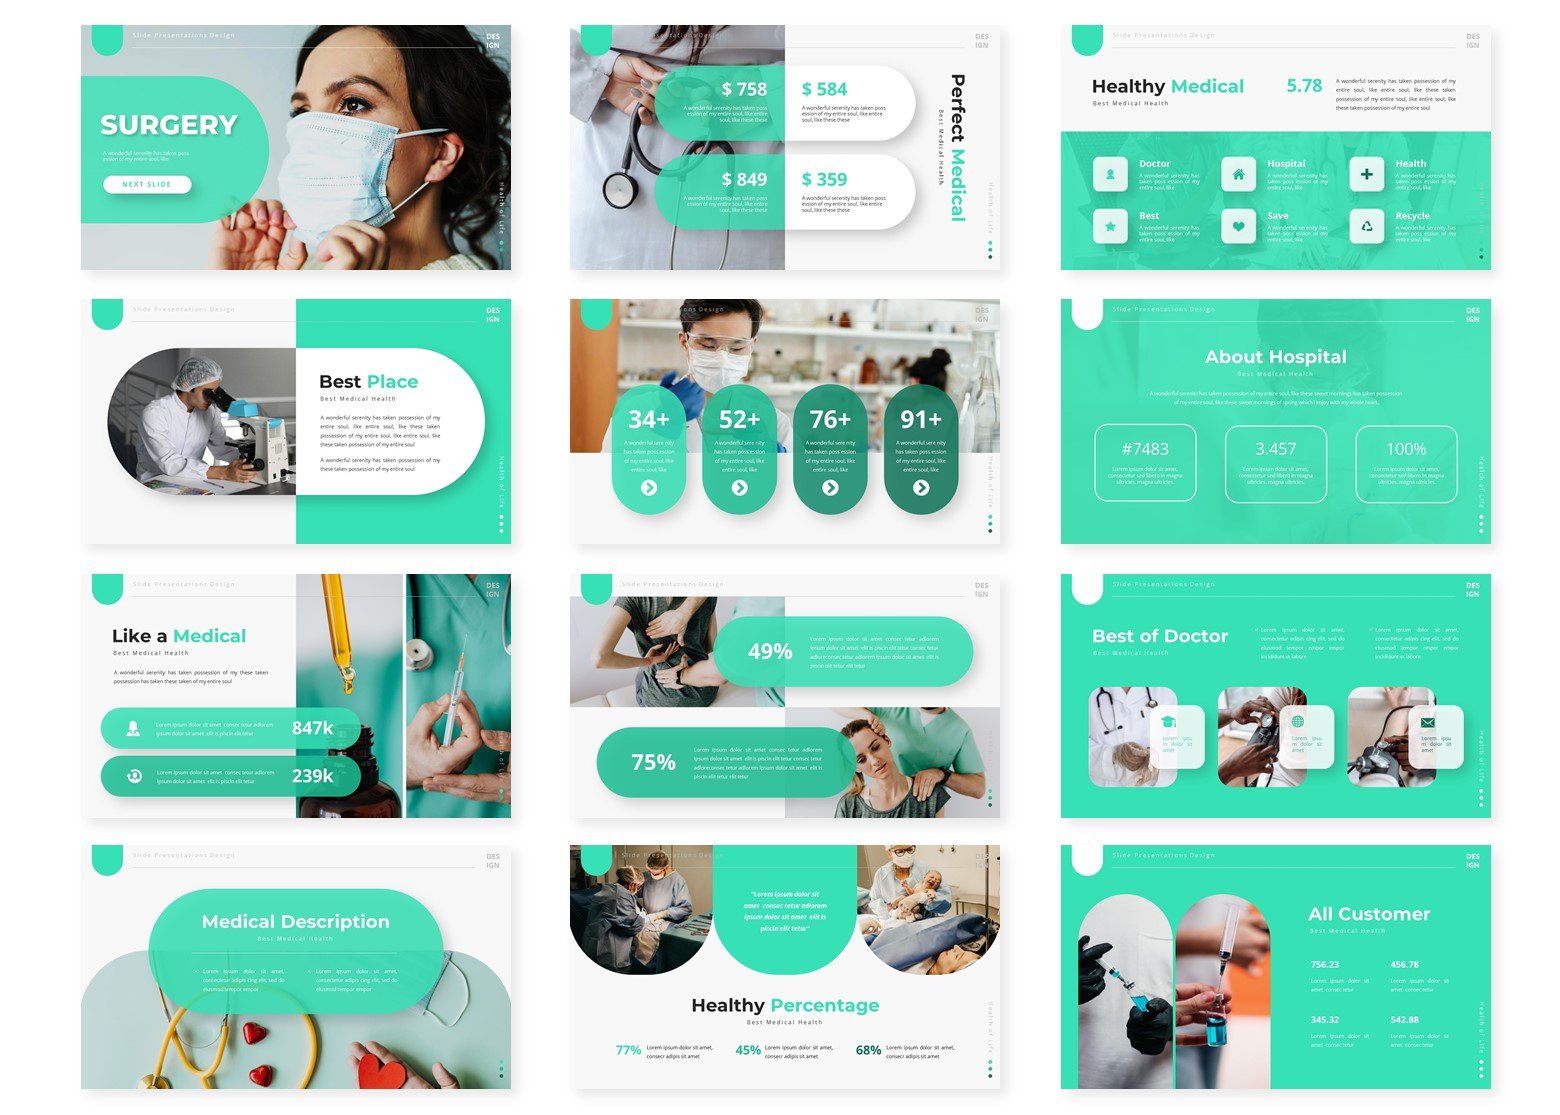 So bright turquoise template for medical topics.